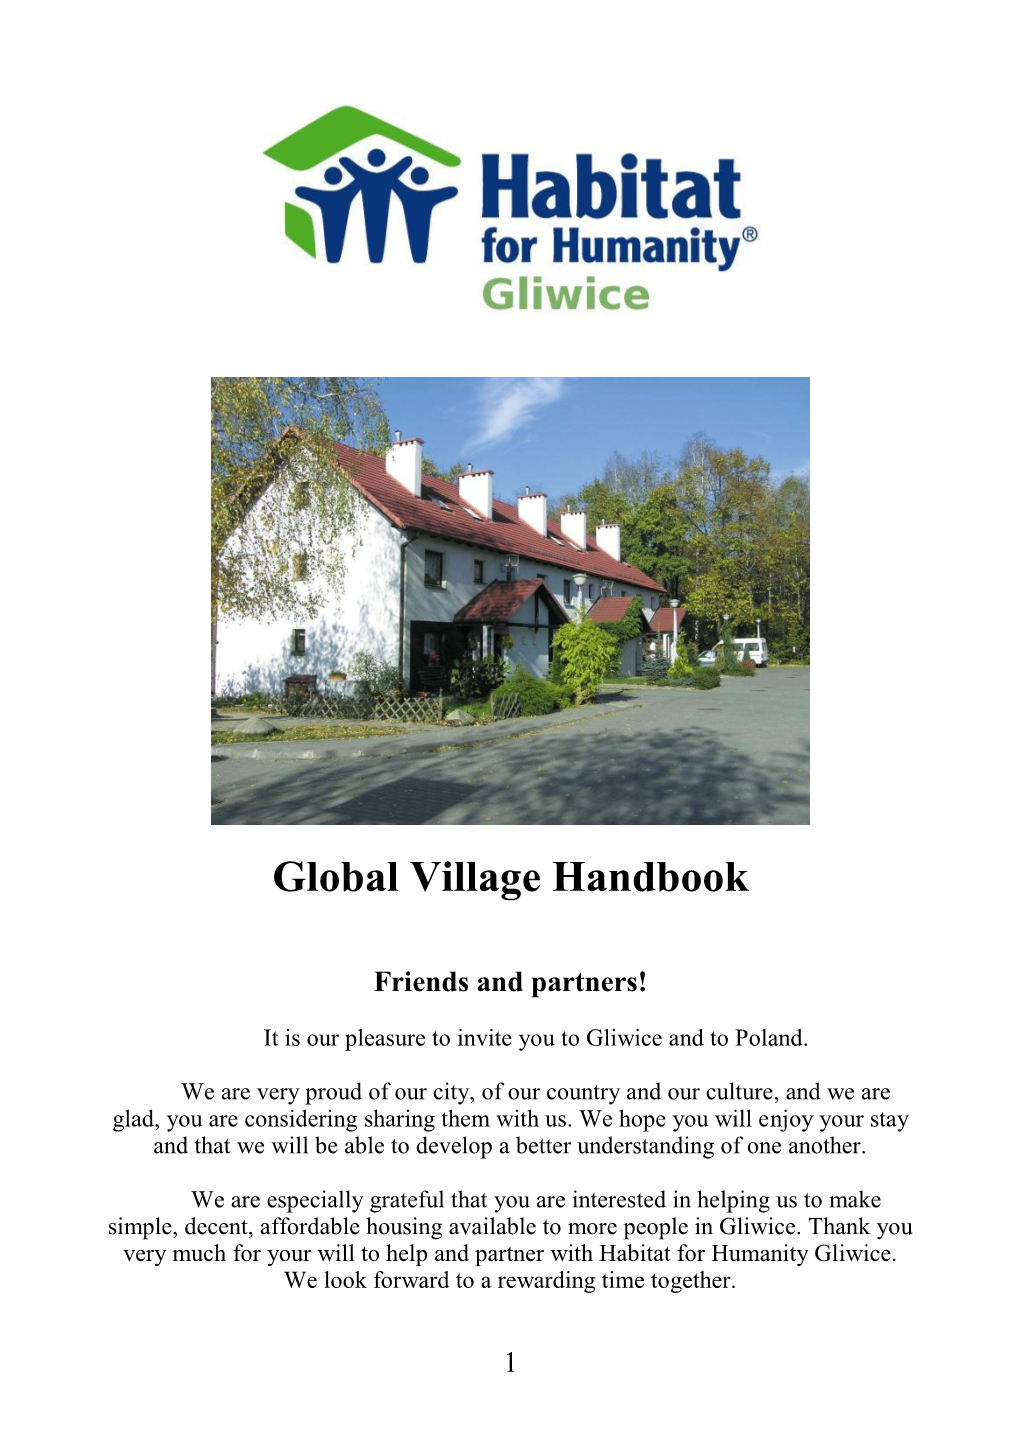 Orientation / Welcome Booklet for Habitat For